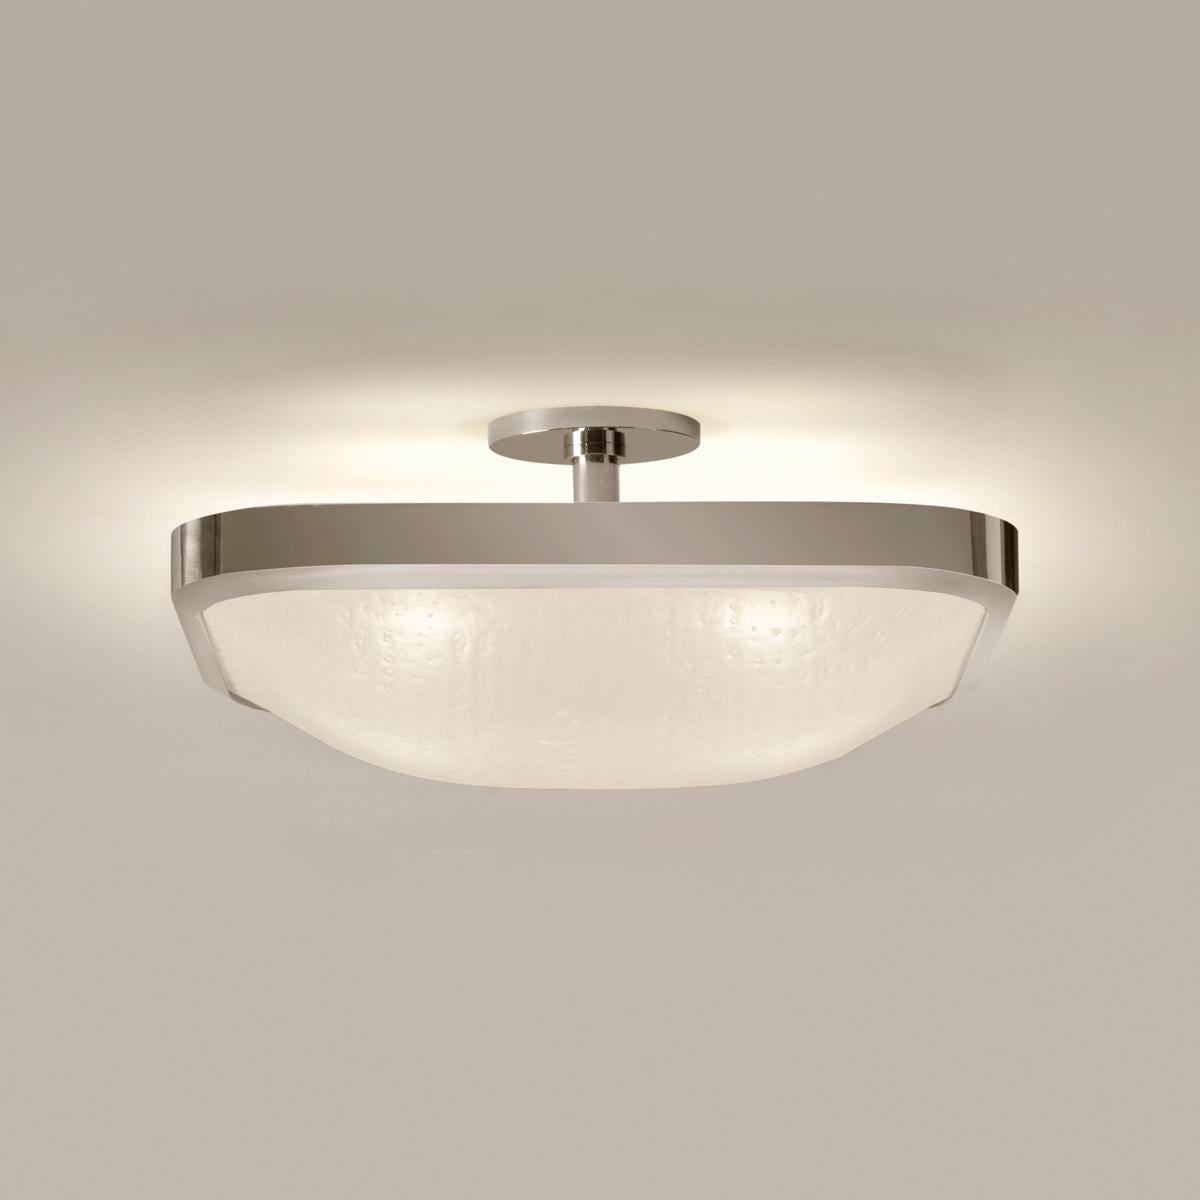 The Uno Square ceiling light exemplifies simple elegance via its clean profile designed around a single Murano glass shade.

Shown in the primary images in polished nickel-subsequent pictures show the fixture in other featured finishes.

Starting at